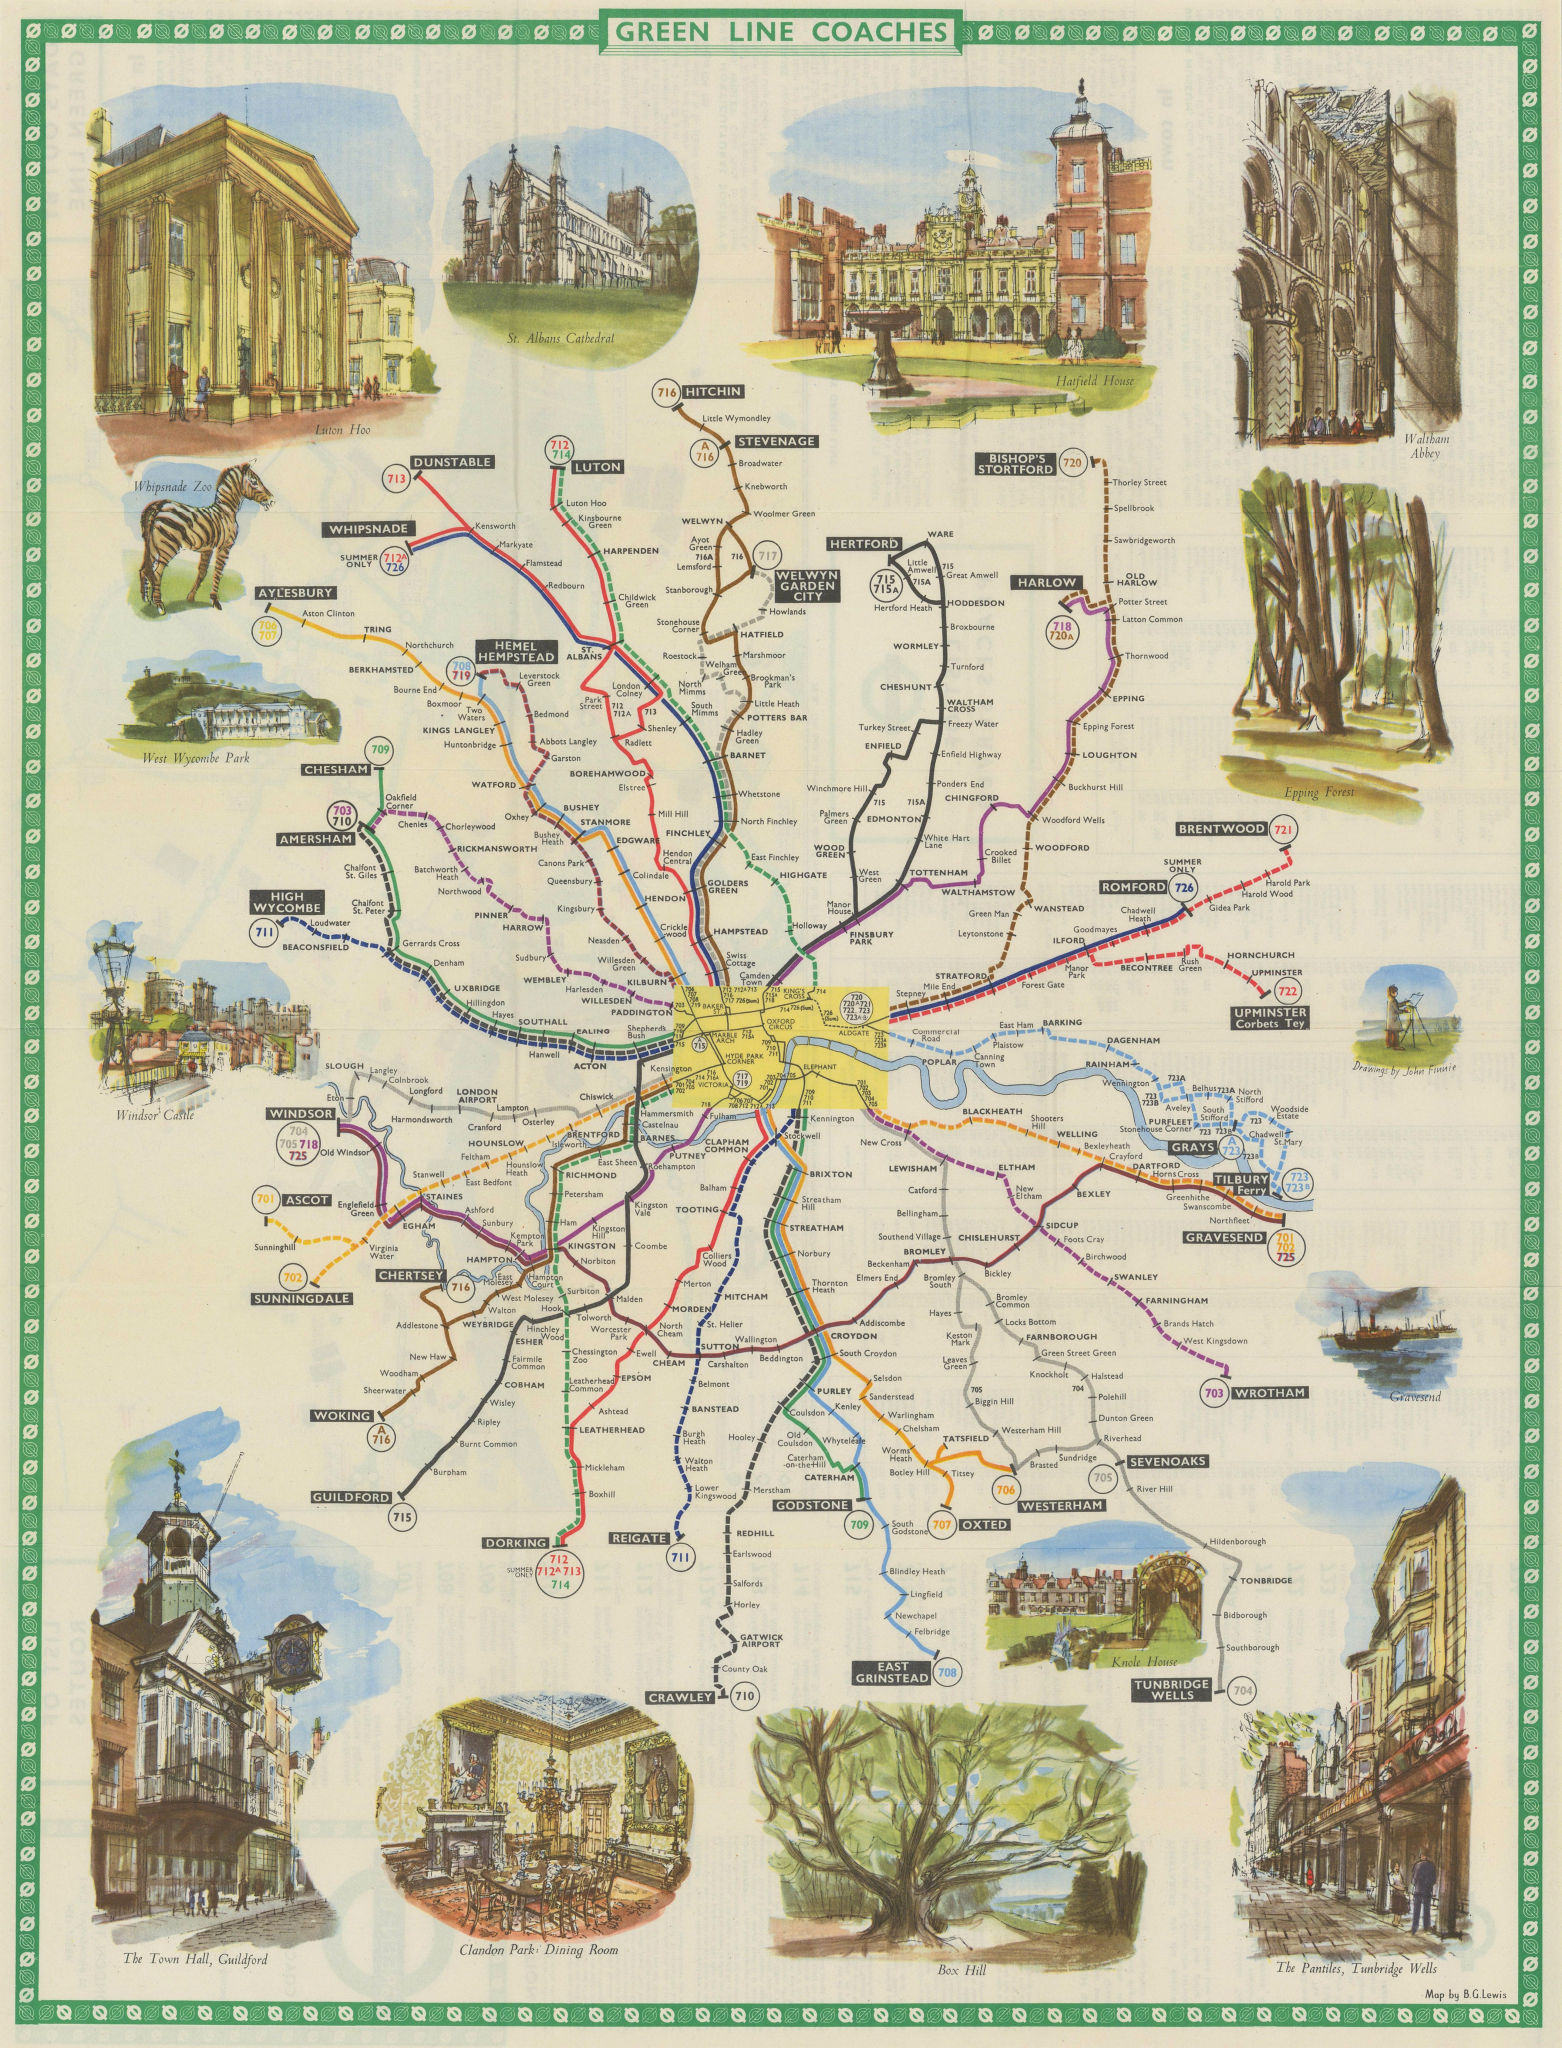 Associate Product London Transport Green Line Coach Routes. LEWIS #1 1963 old vintage map chart